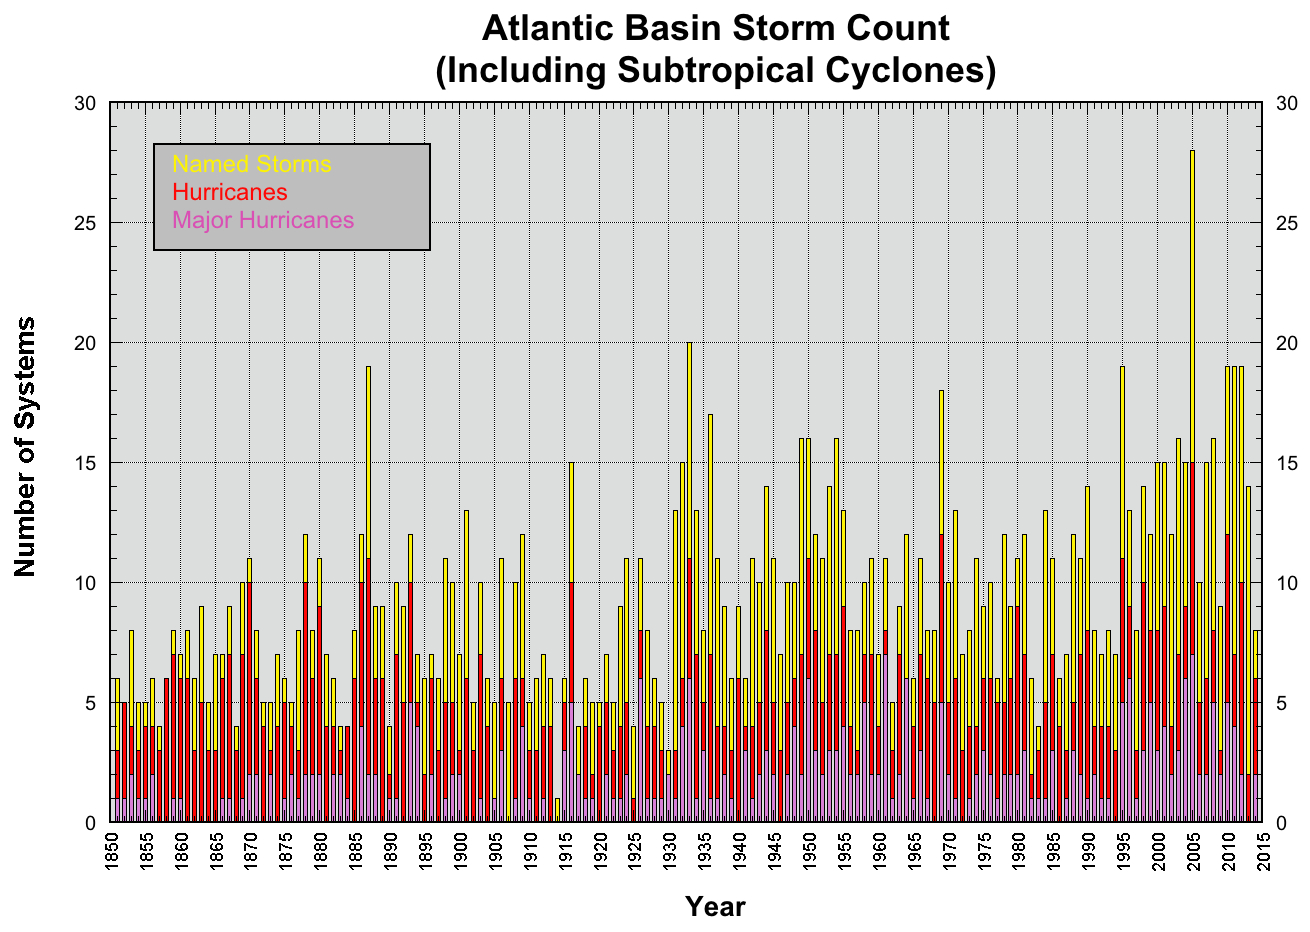 [Graph of Tropical Cyclone Activity in the Atlantic Basin]